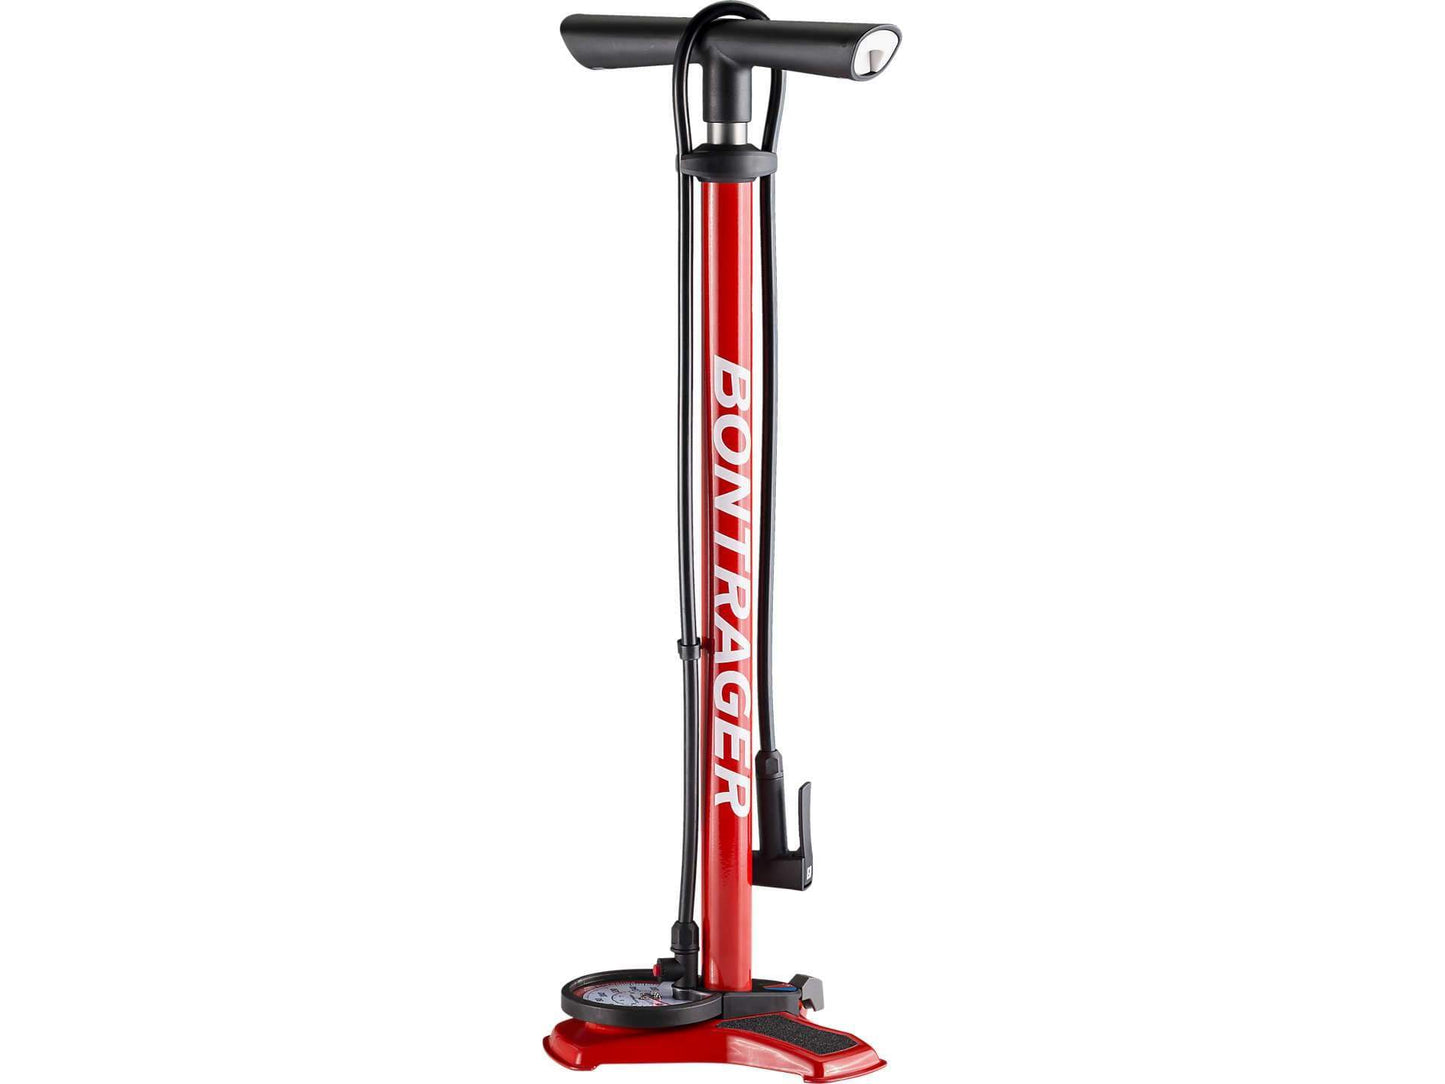 Bontrager Dual Charger Floor Pump Red